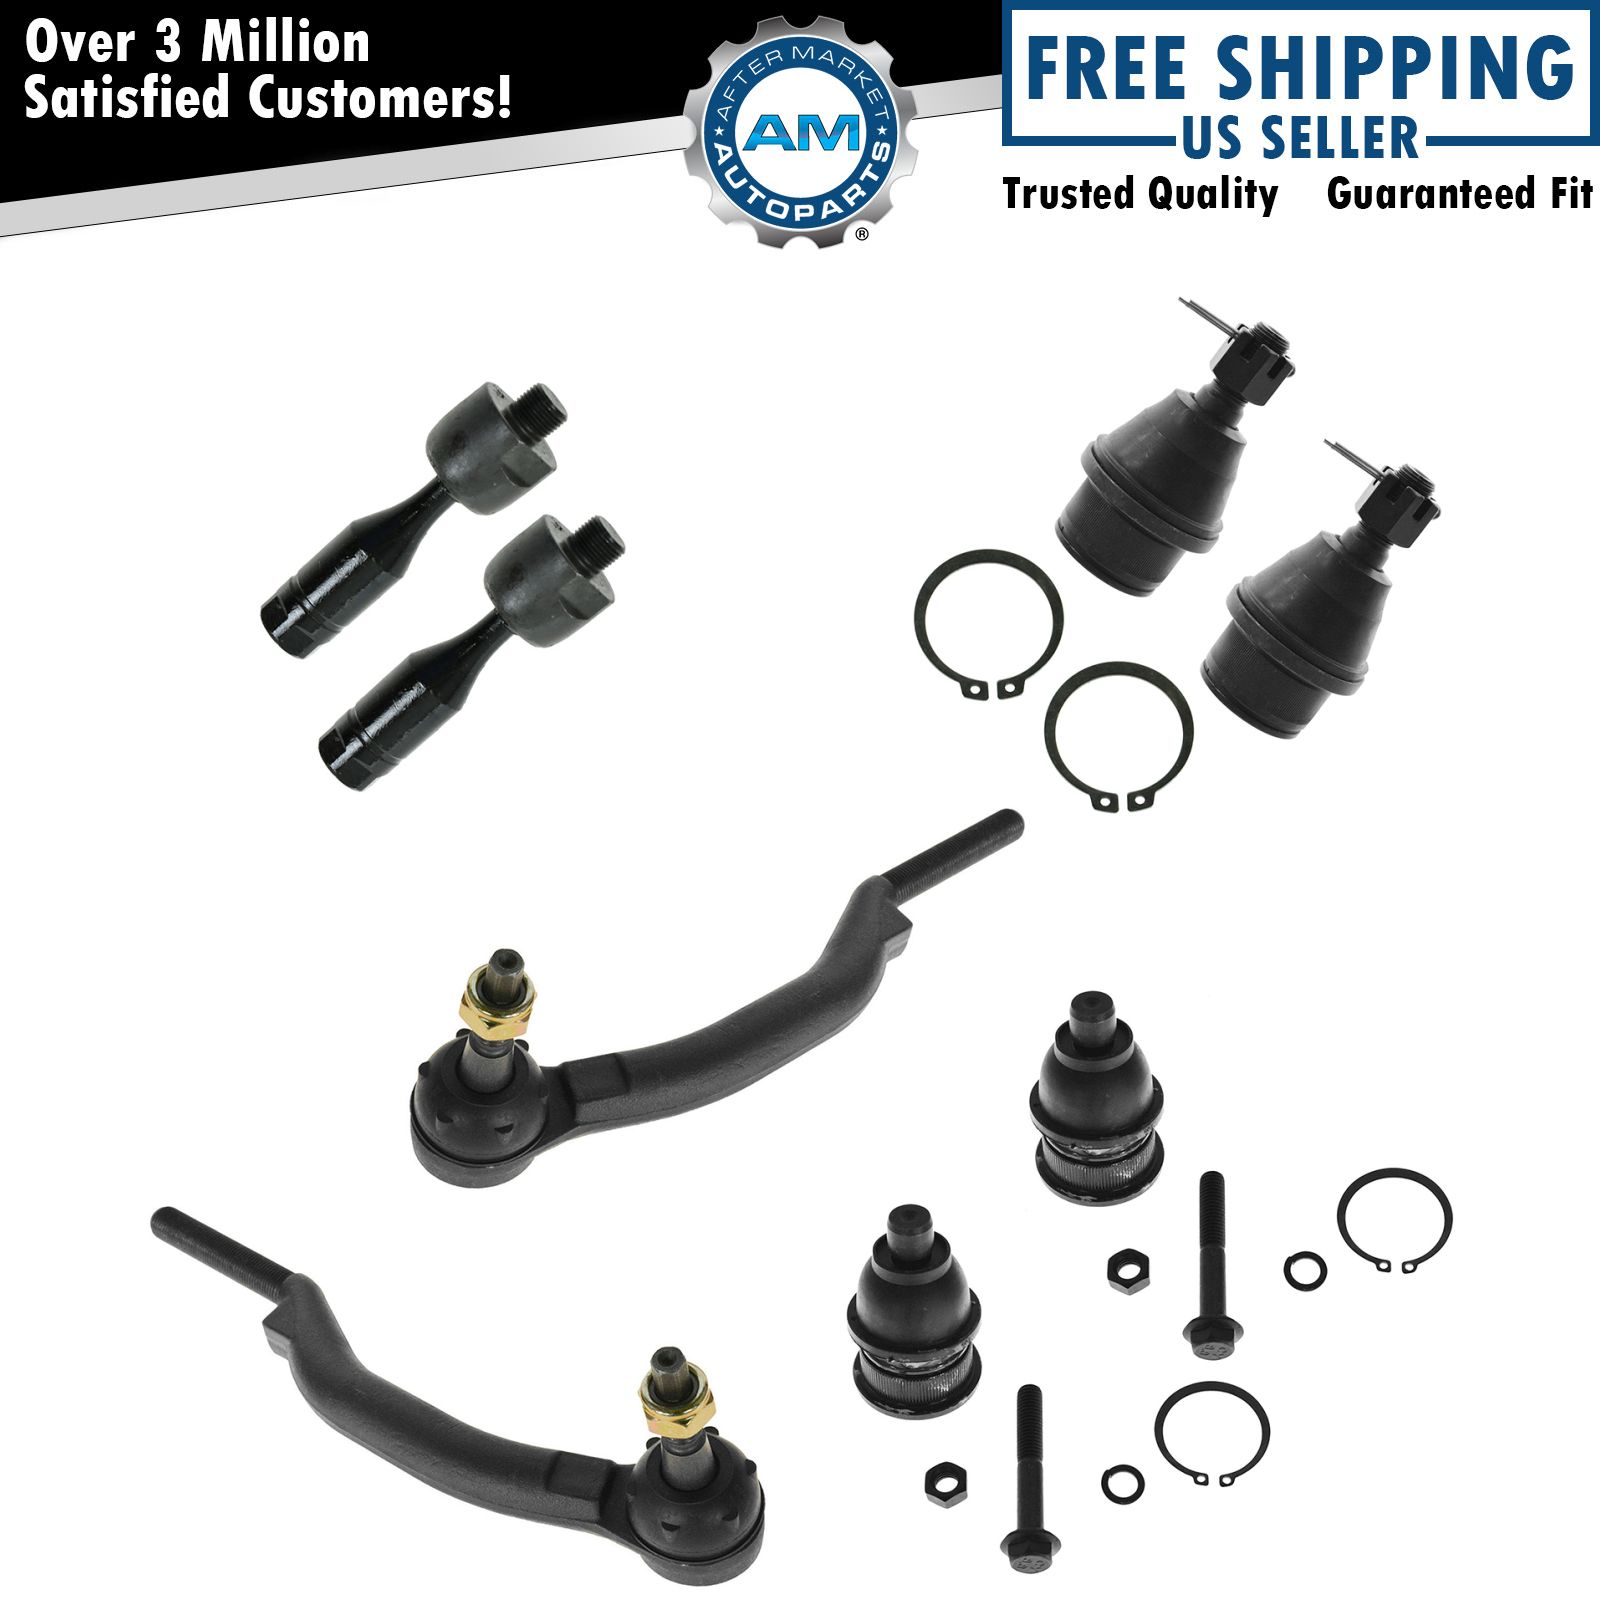 Ball Joint Tie Rod End Kit Steering Suspension Set of 8 for Chevy GMC Buick SUV